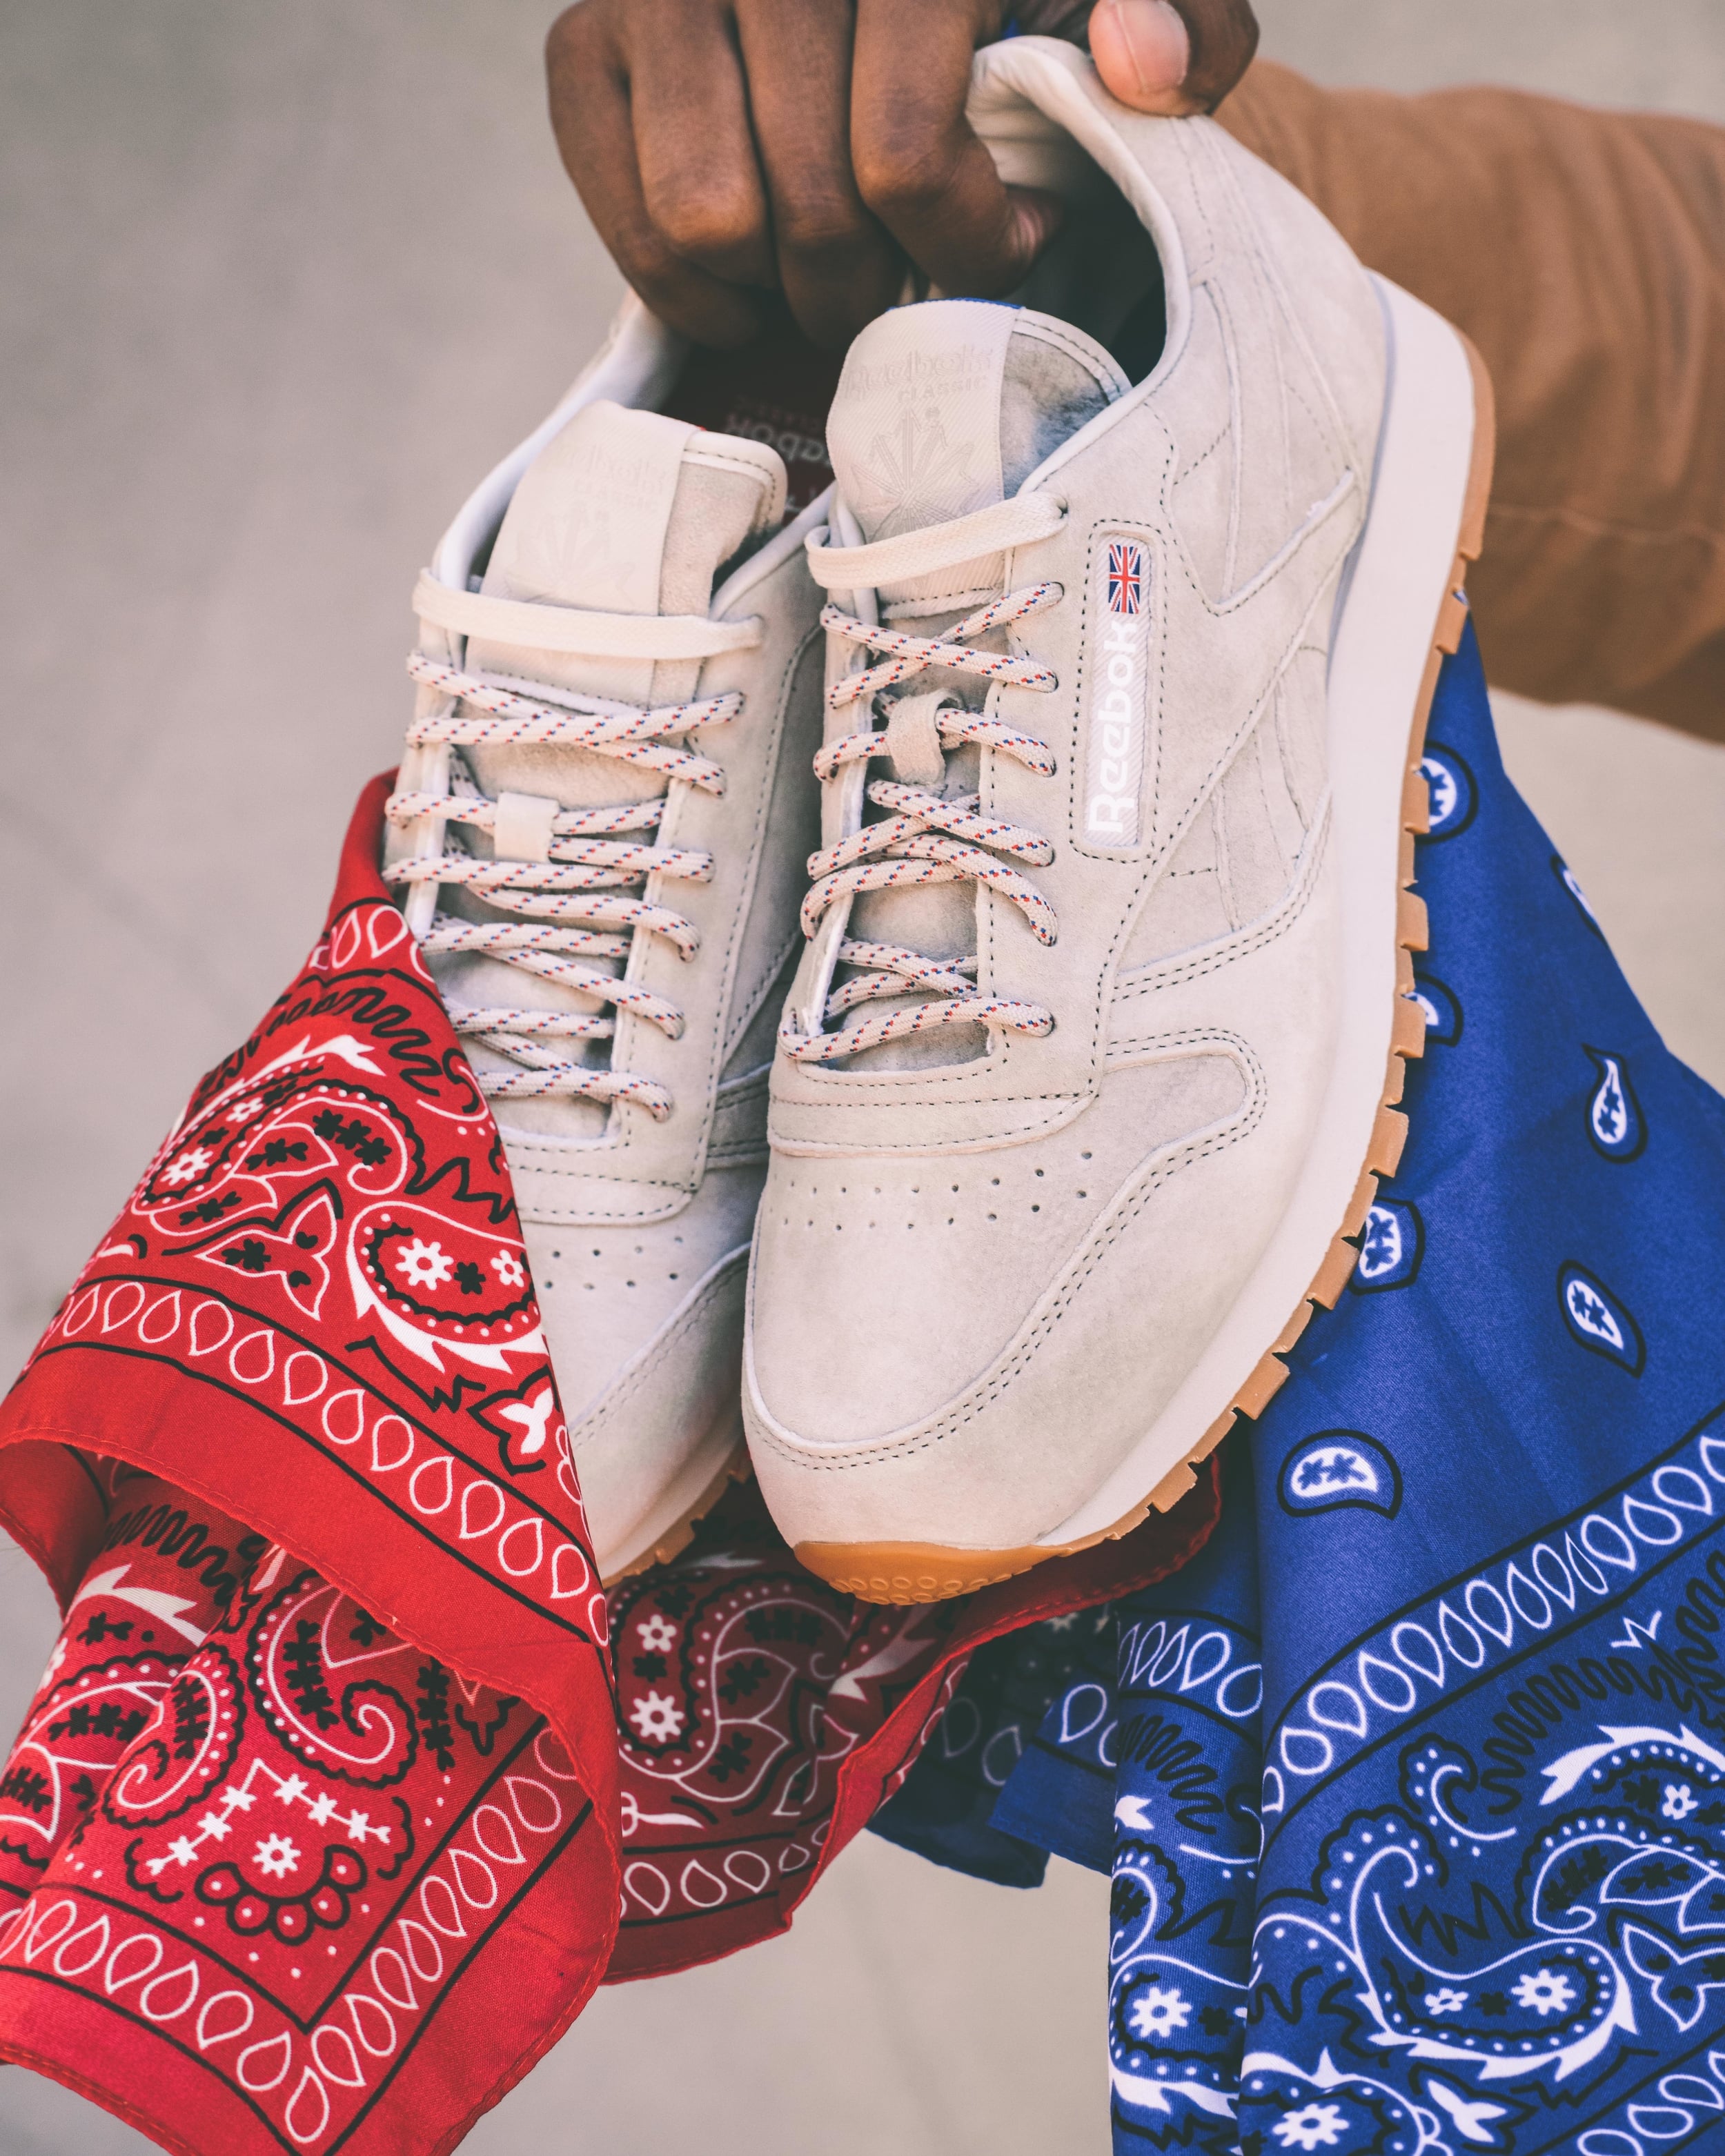 Expensive Perpetrator Monk KENDRICK LAMAR x REEBOK CLASSIC LEATHER "NEUTRAL" — Epitome